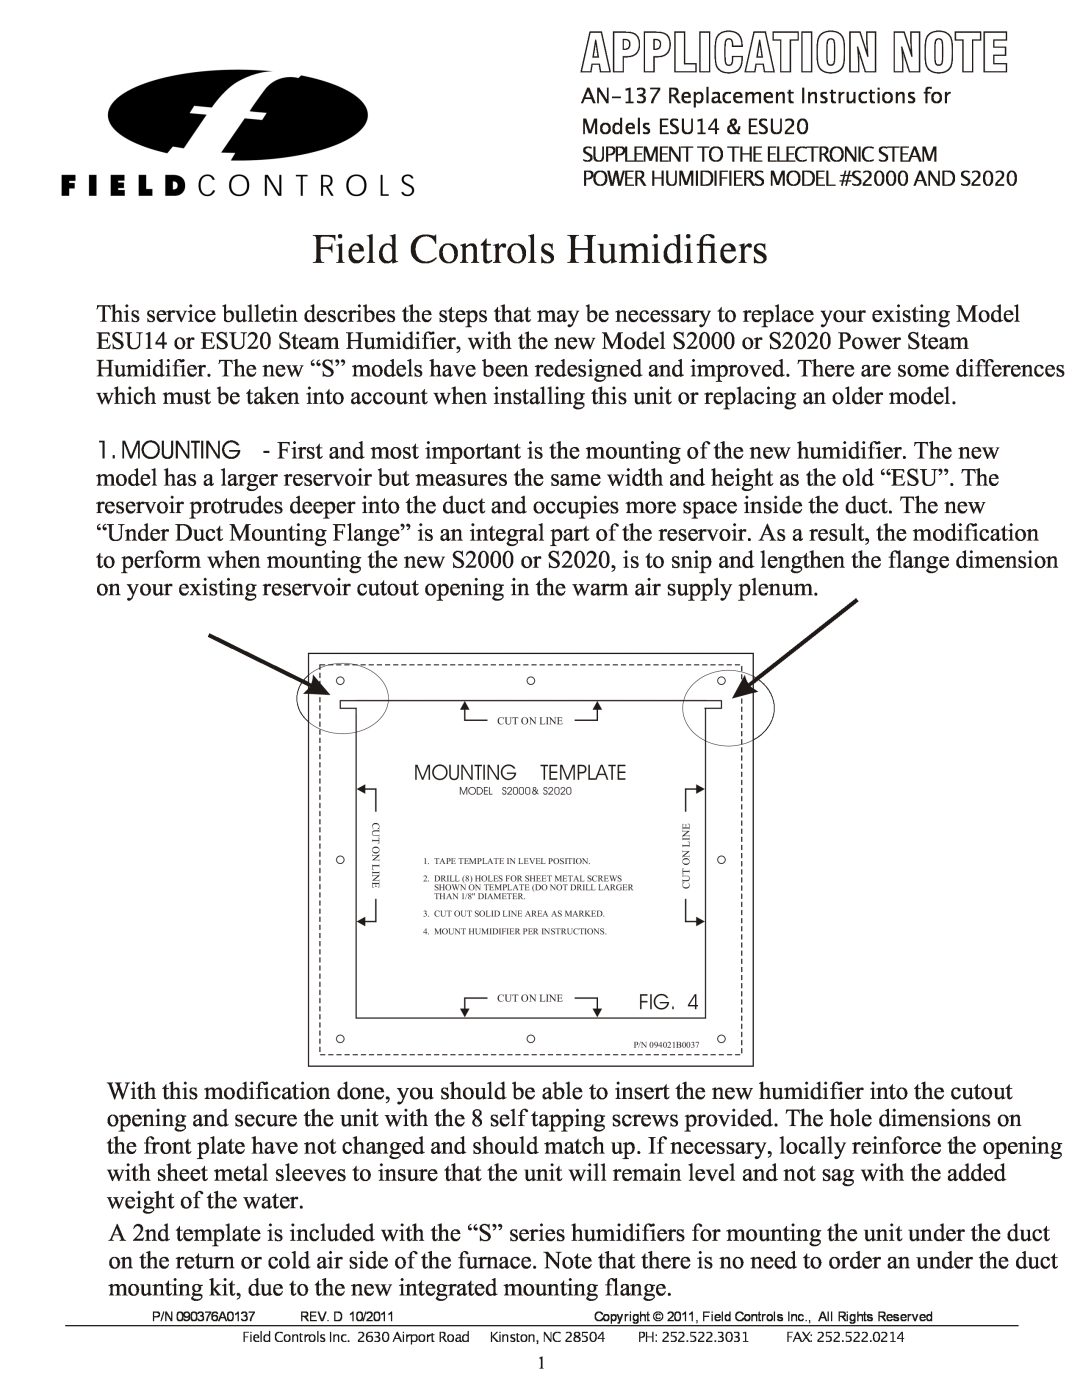 Field Controls dimensions Field Controls Humidiﬁers, AN-137 Replacement Instructions for Models ESU14 & ESU20 